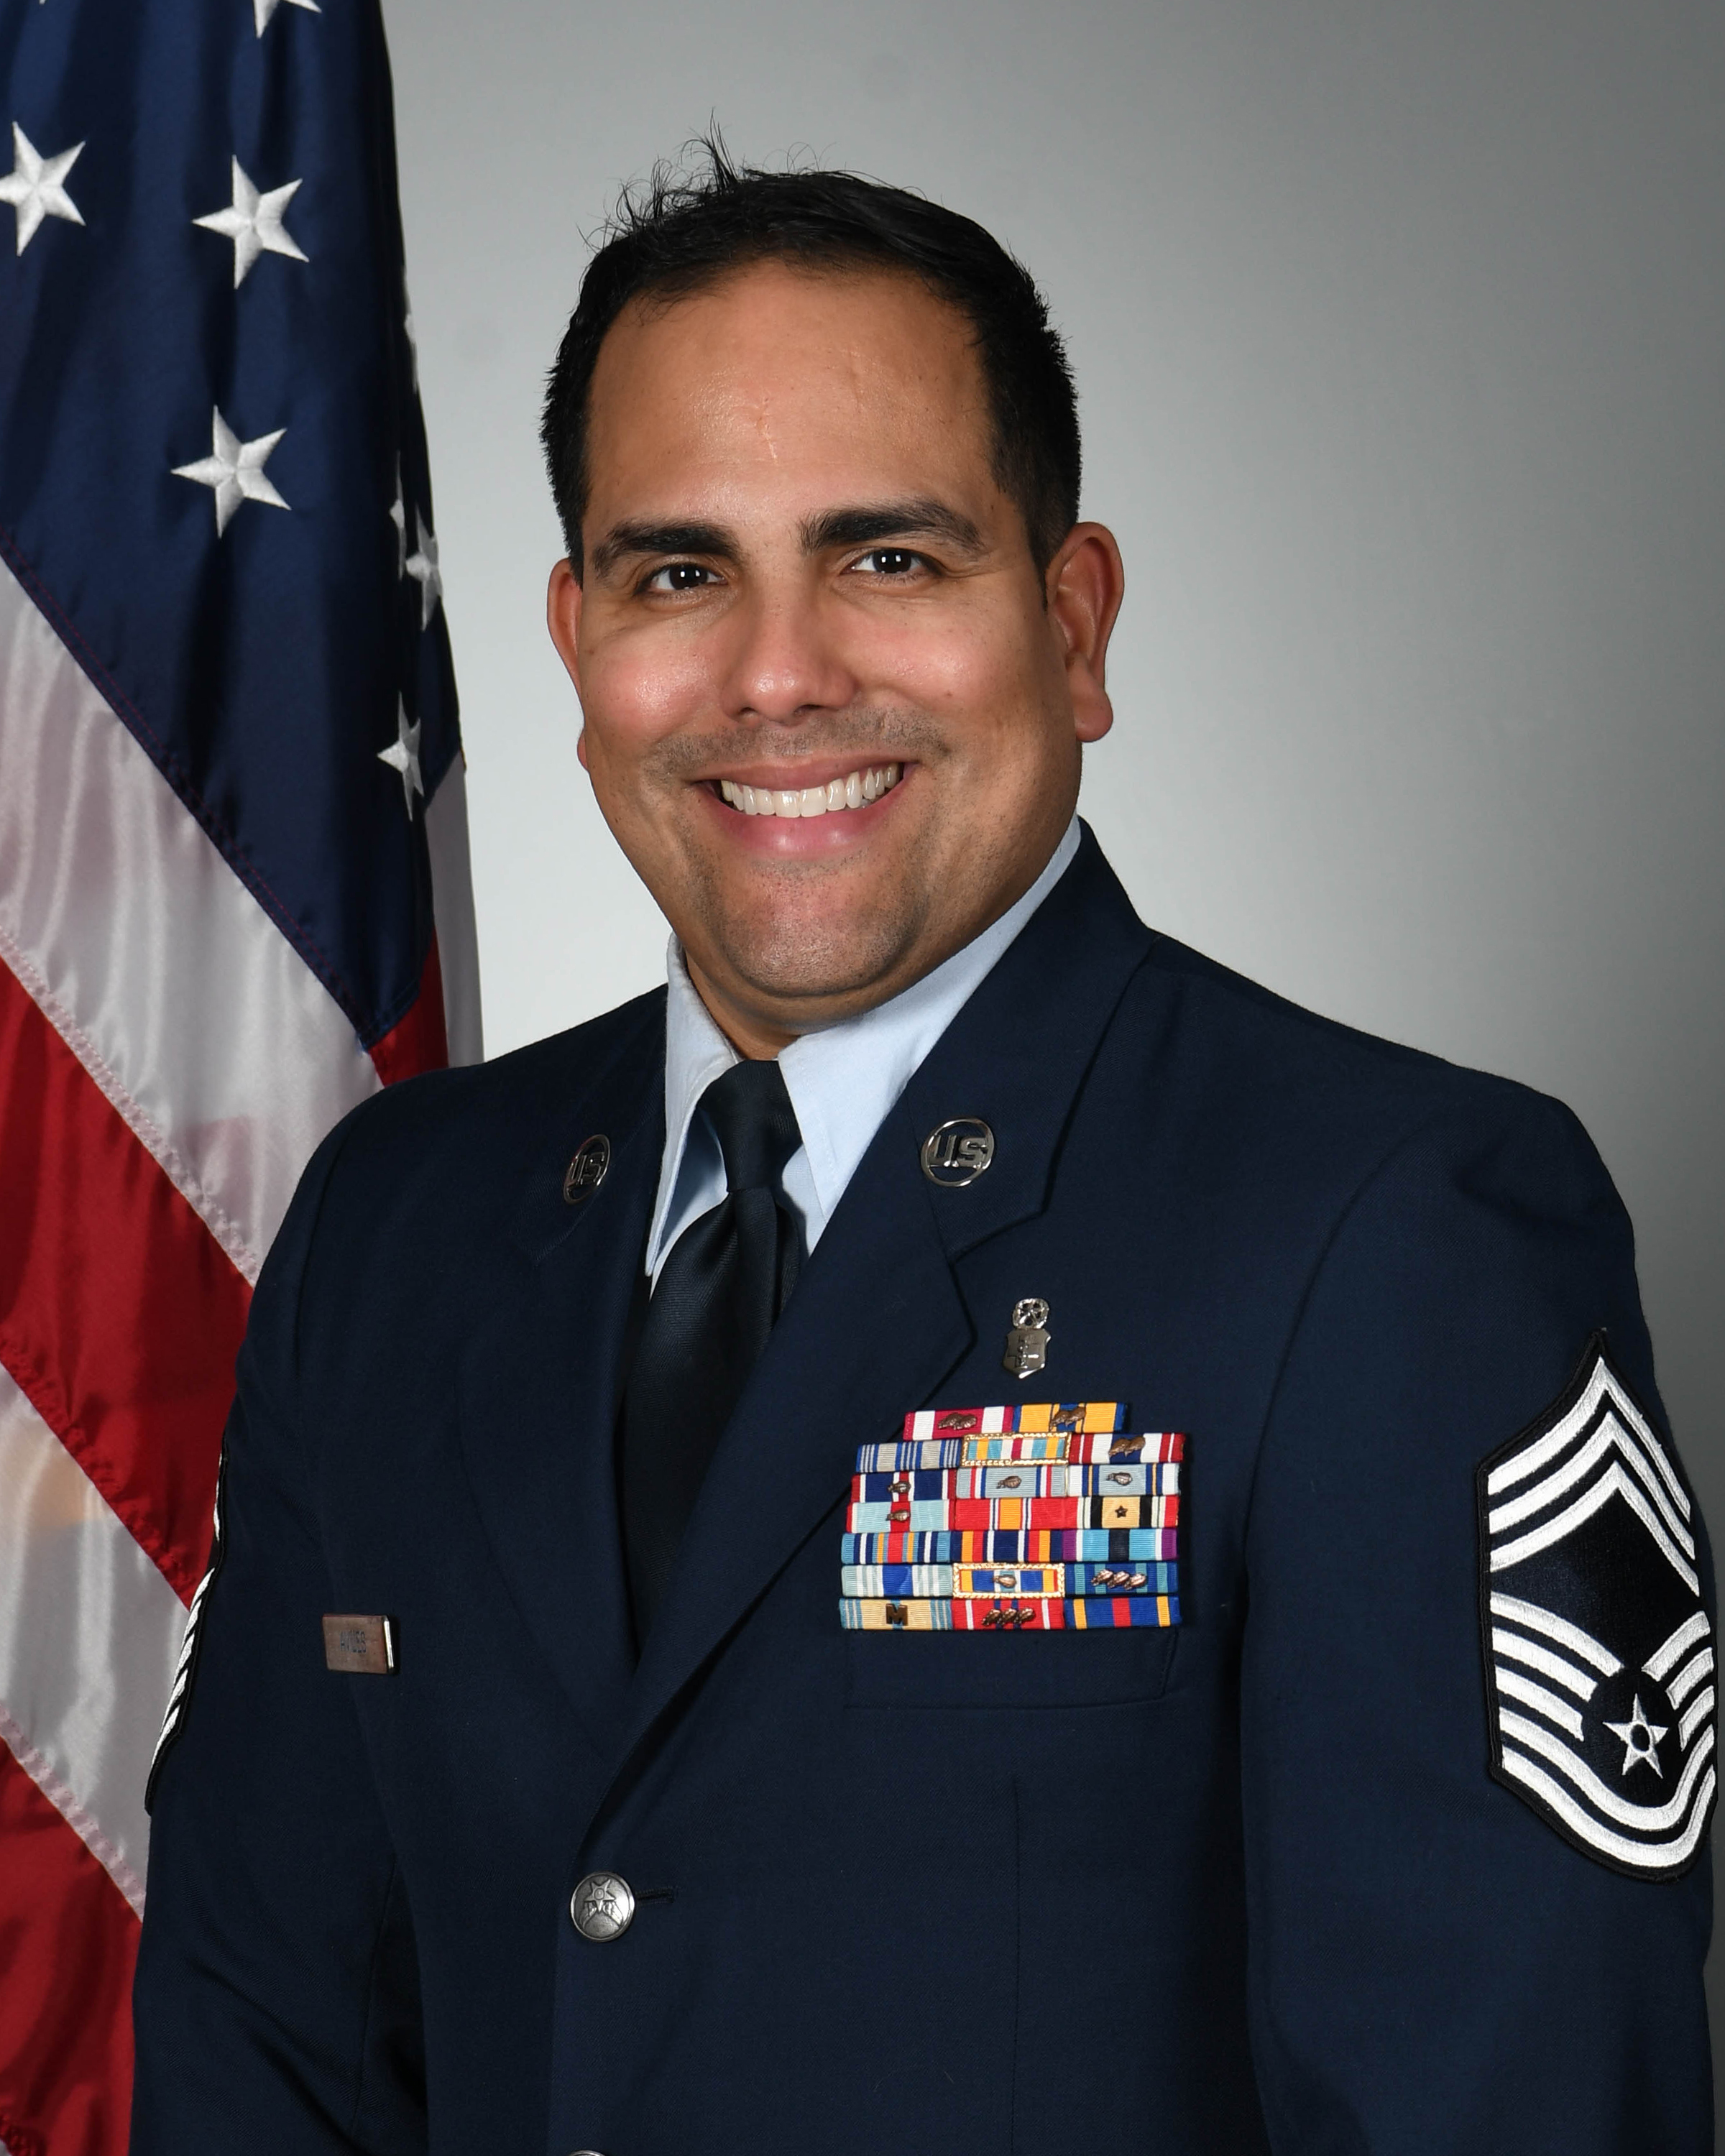 Chief Master Sgt. Aviles official photo